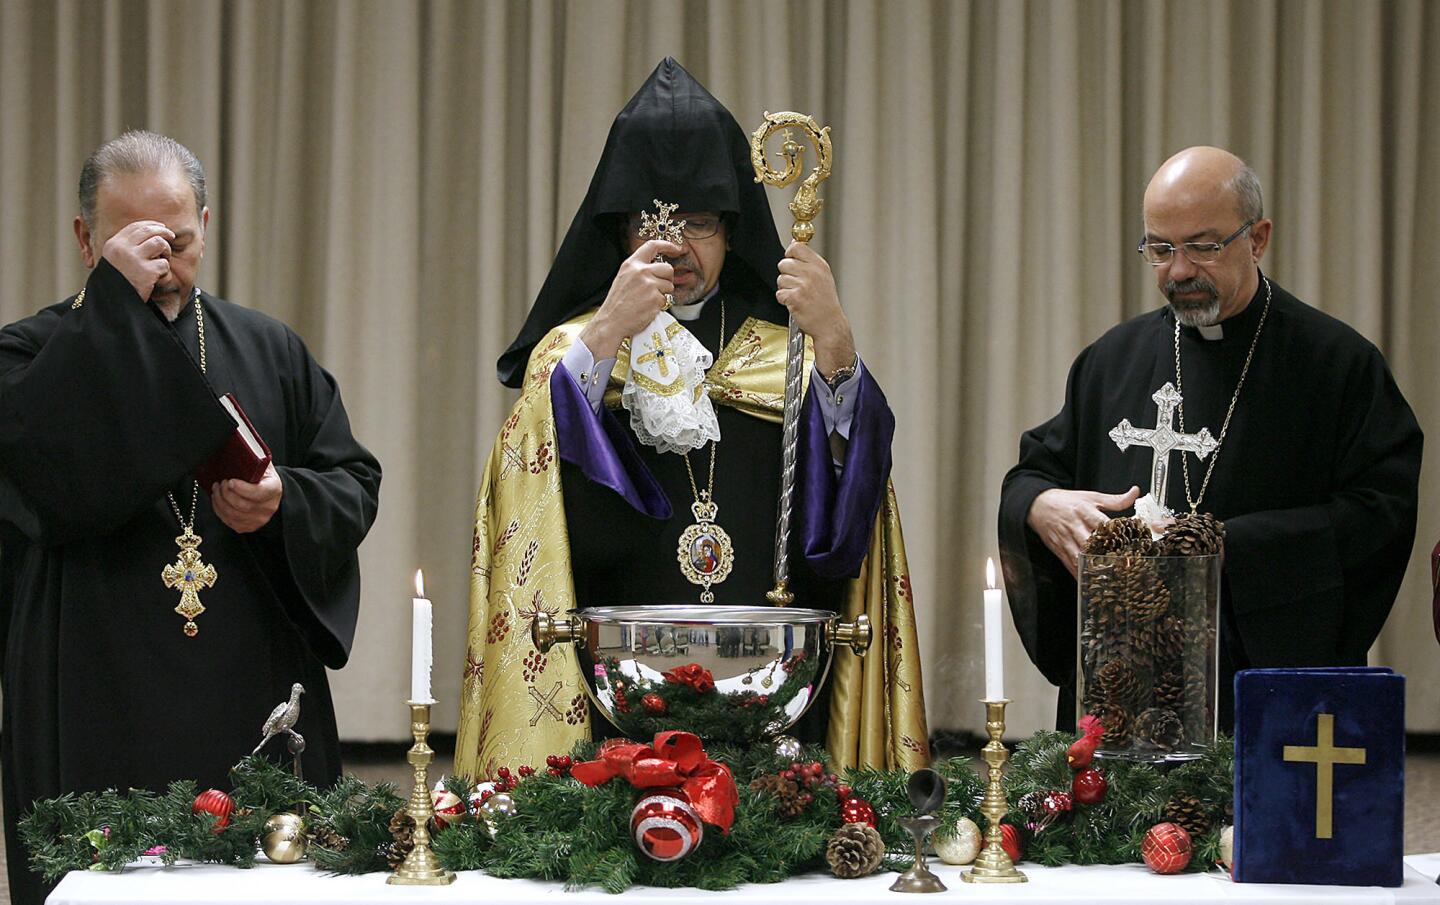 His Eminence Archbishop Moushegh Mardirossian, Prelate of the Armenian Church of the Western United States, center, blesses water with the assistance of Rev. Father Vazken Atmajian, left, and Rev. Father Komitas Torosian right, at Glendale Memorial Hospital in Glendale on Friday, January 4, 2013. His Eminence Mardirossian performed a short ceremony to celebrate New Years and the Armenian Christmas this weekend.